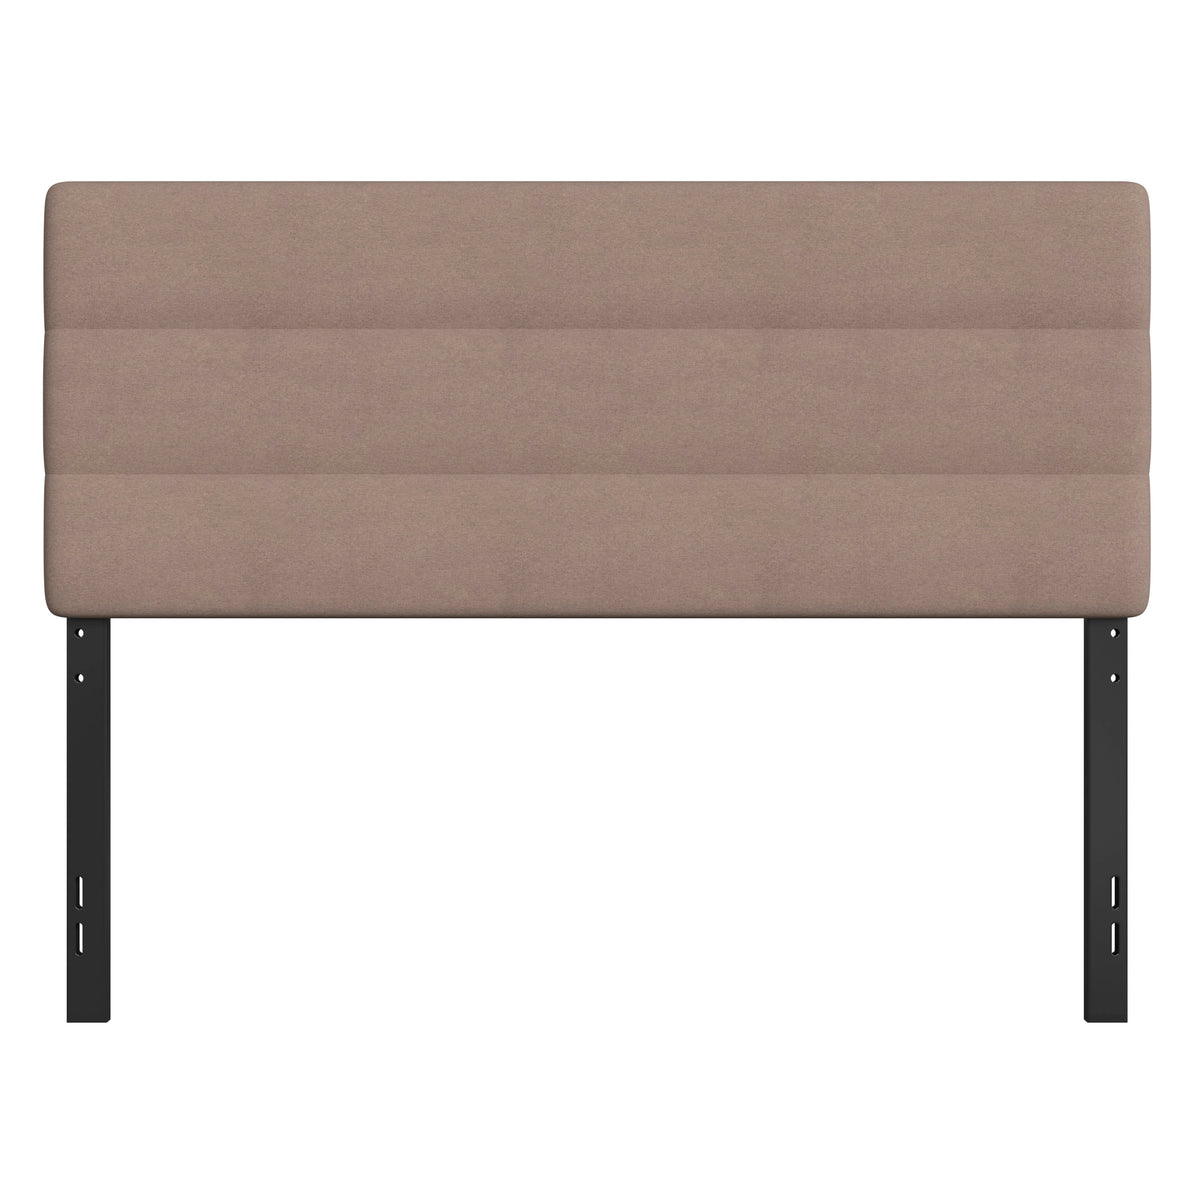 Taupe,Queen |#| Universal Fit Tufted Upholstered Headboard in Taupe Fabric - Queen